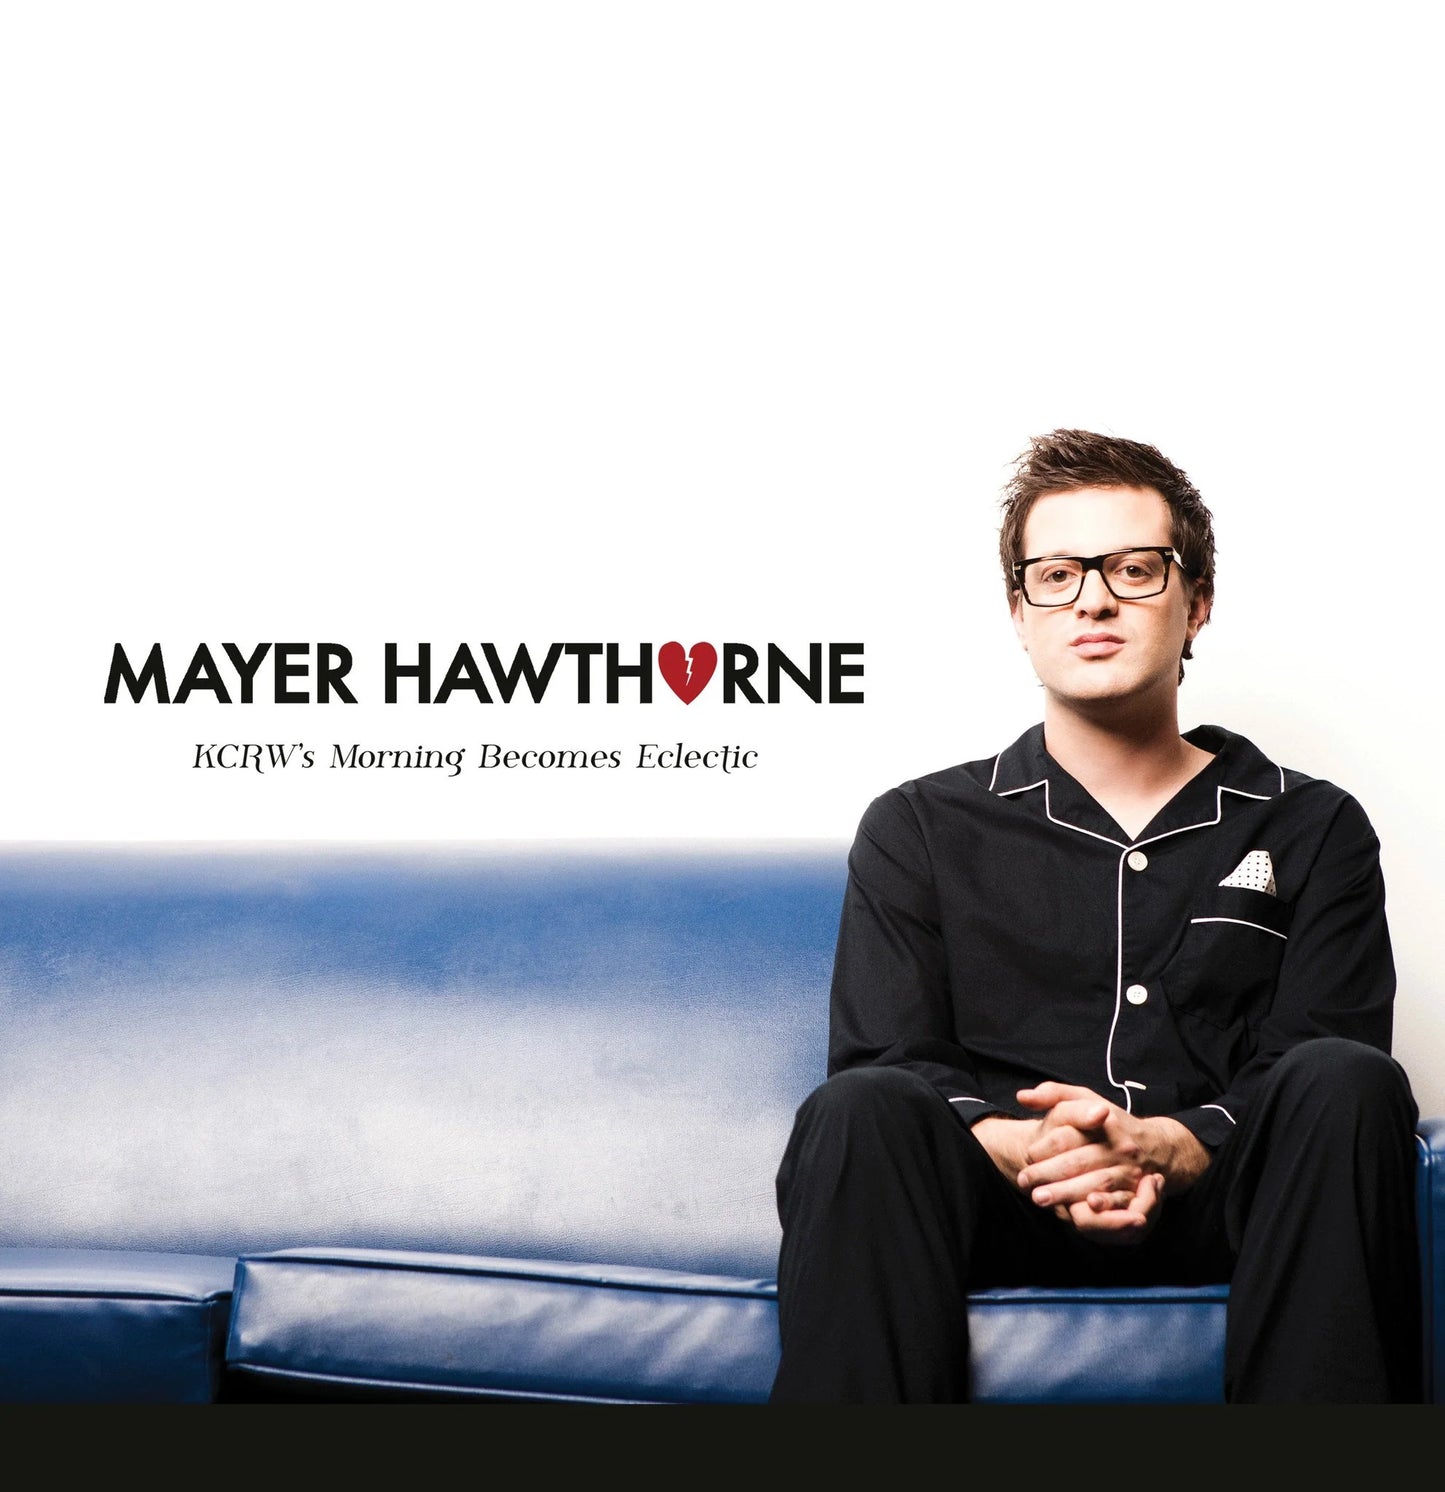 Mayer Hawthorne - JKCRW's Morning Becomes Eclectic 10" (Clear Vinyl)